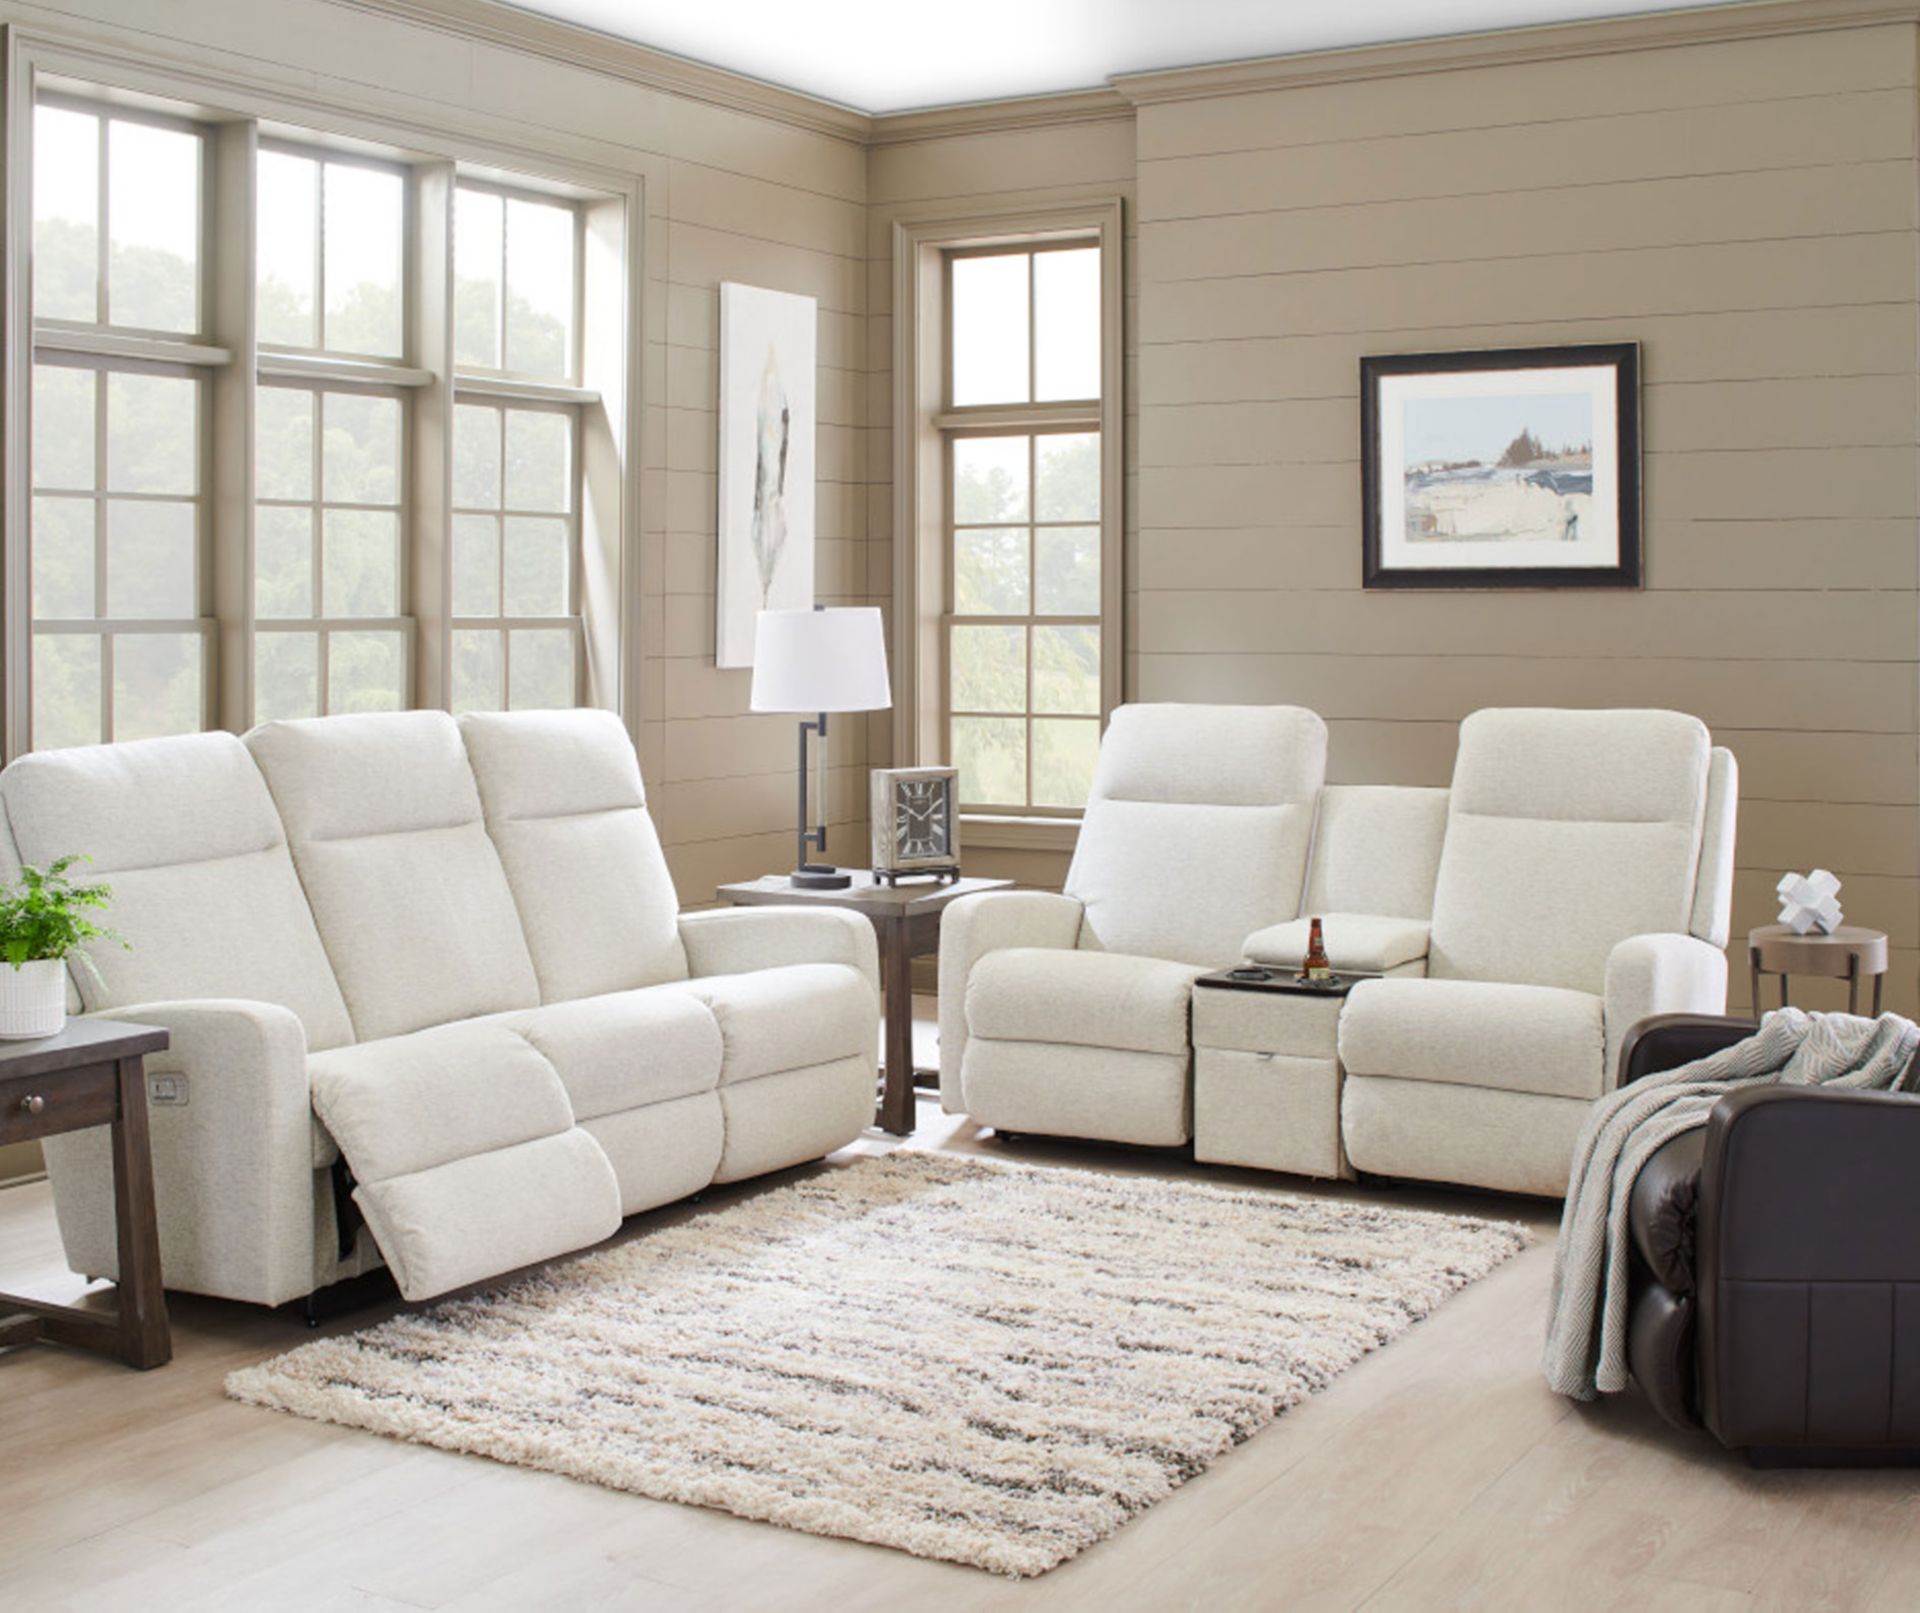 Finley Collection. White Modern reclining Sofa collection